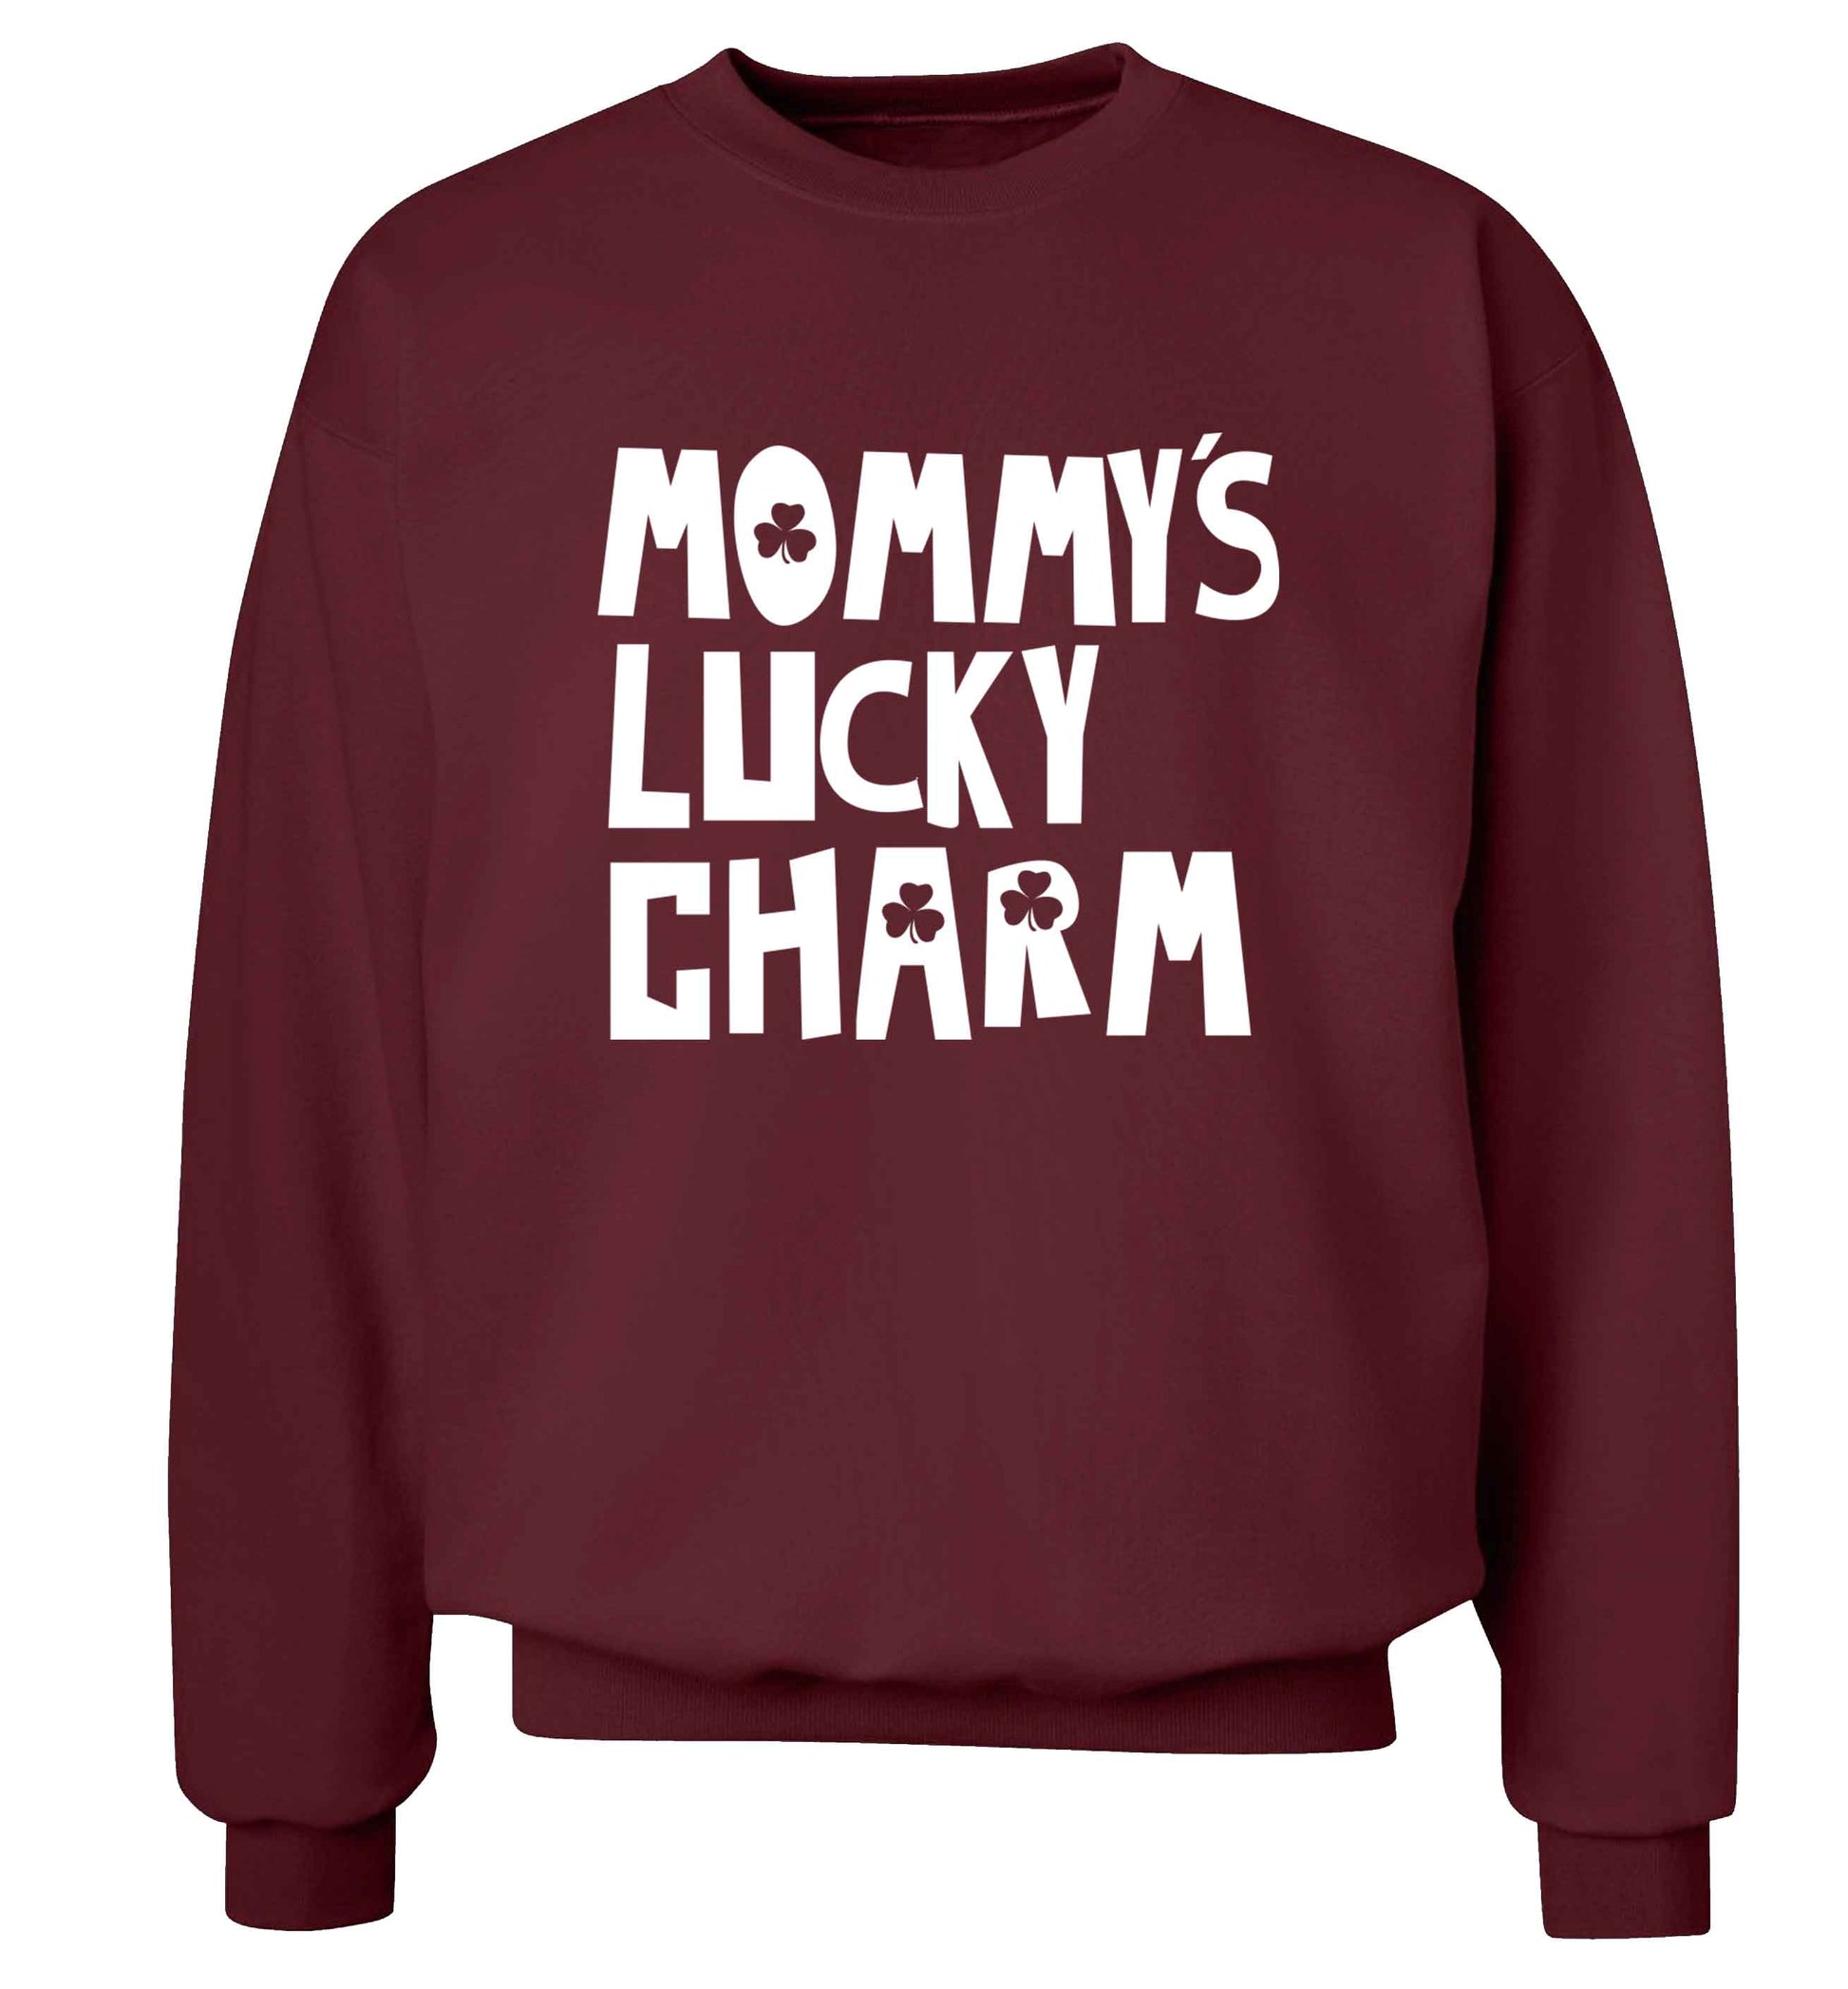 Mommy's lucky charm adult's unisex maroon sweater 2XL